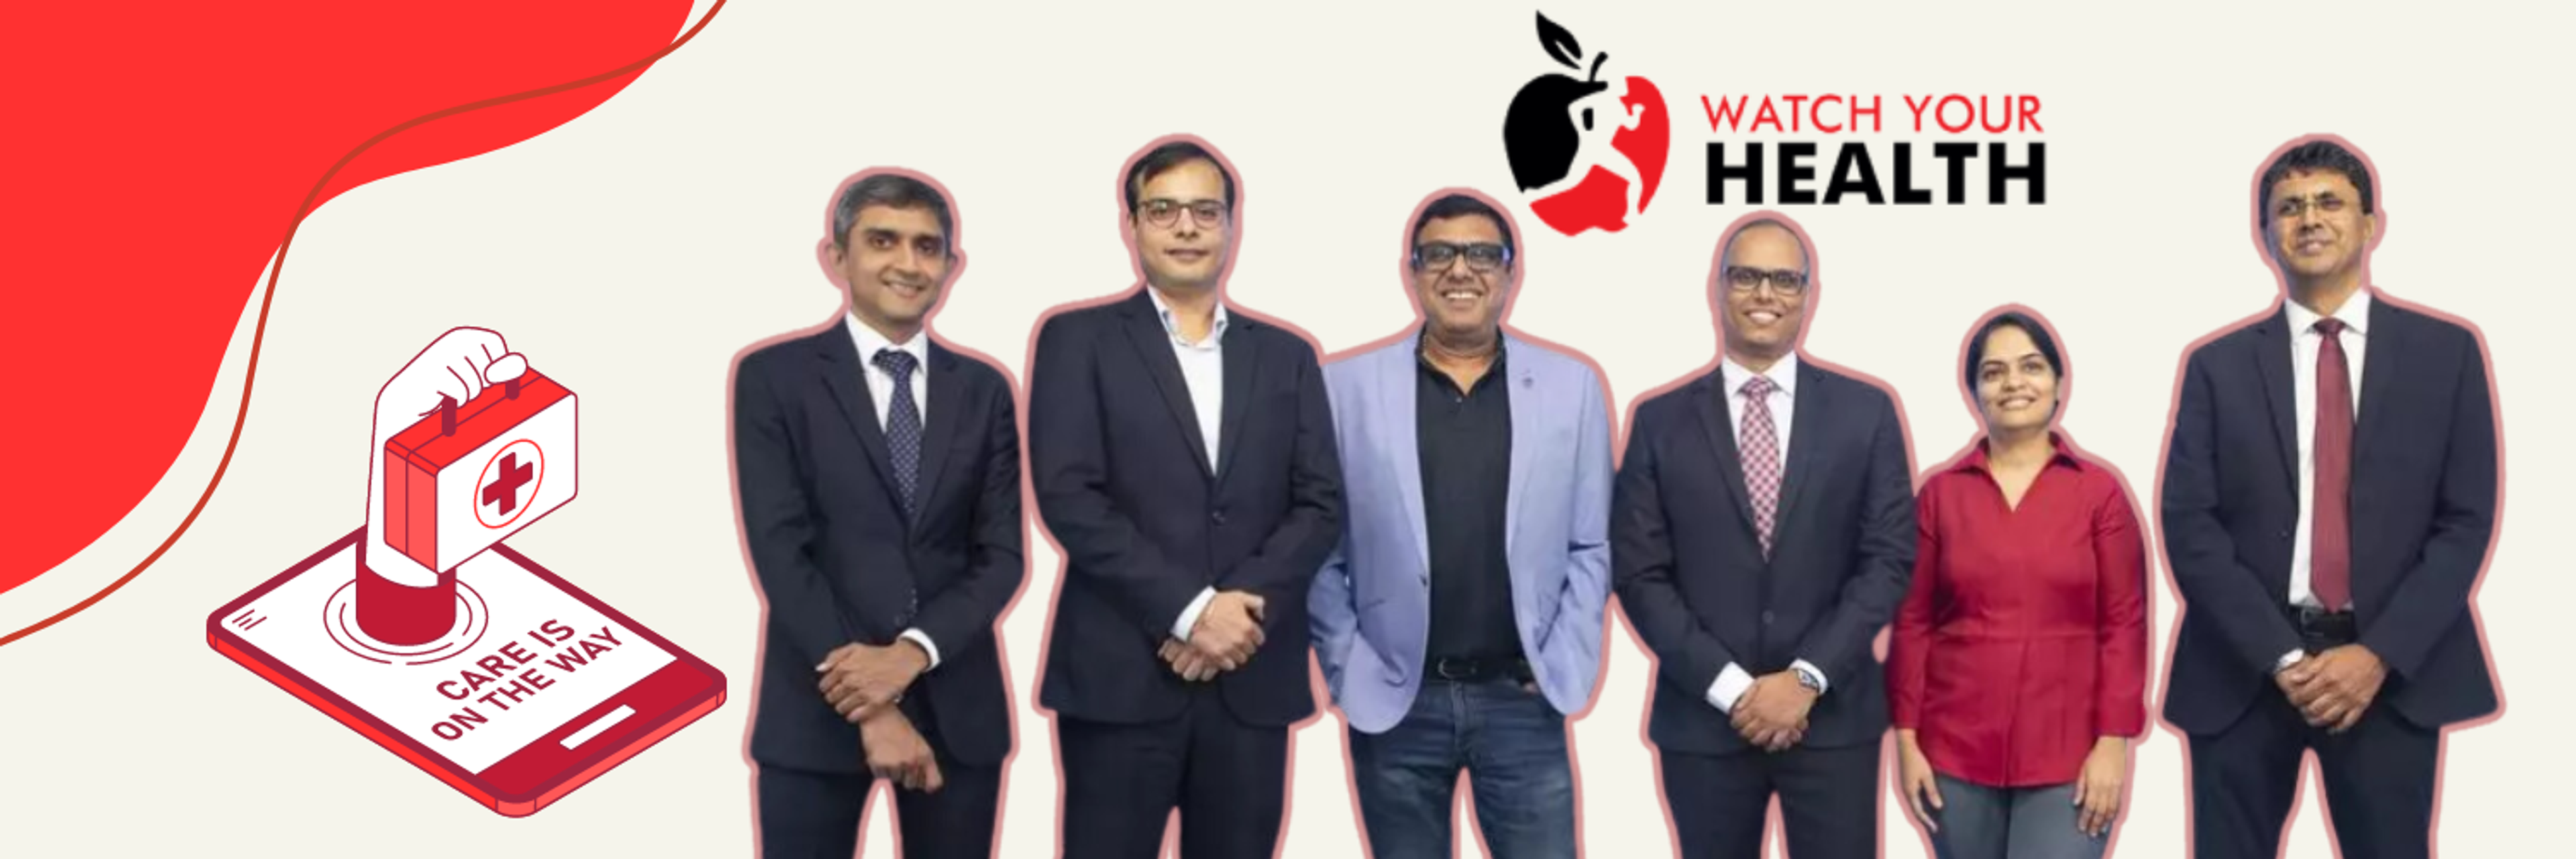 The image shows the founders and key members of the Thane-based healthtech startup Watch Your Health. They are standing in a professional setting, dressed in business attire. The company logo, featuring an apple and a running person, is displayed prominently above them. To the left, there is an illustration of a first aid kit emerging from a smartphone with the text "Care is on the way," symbolizing the company's mission to provide accessible and personalized health management solutions through technology.